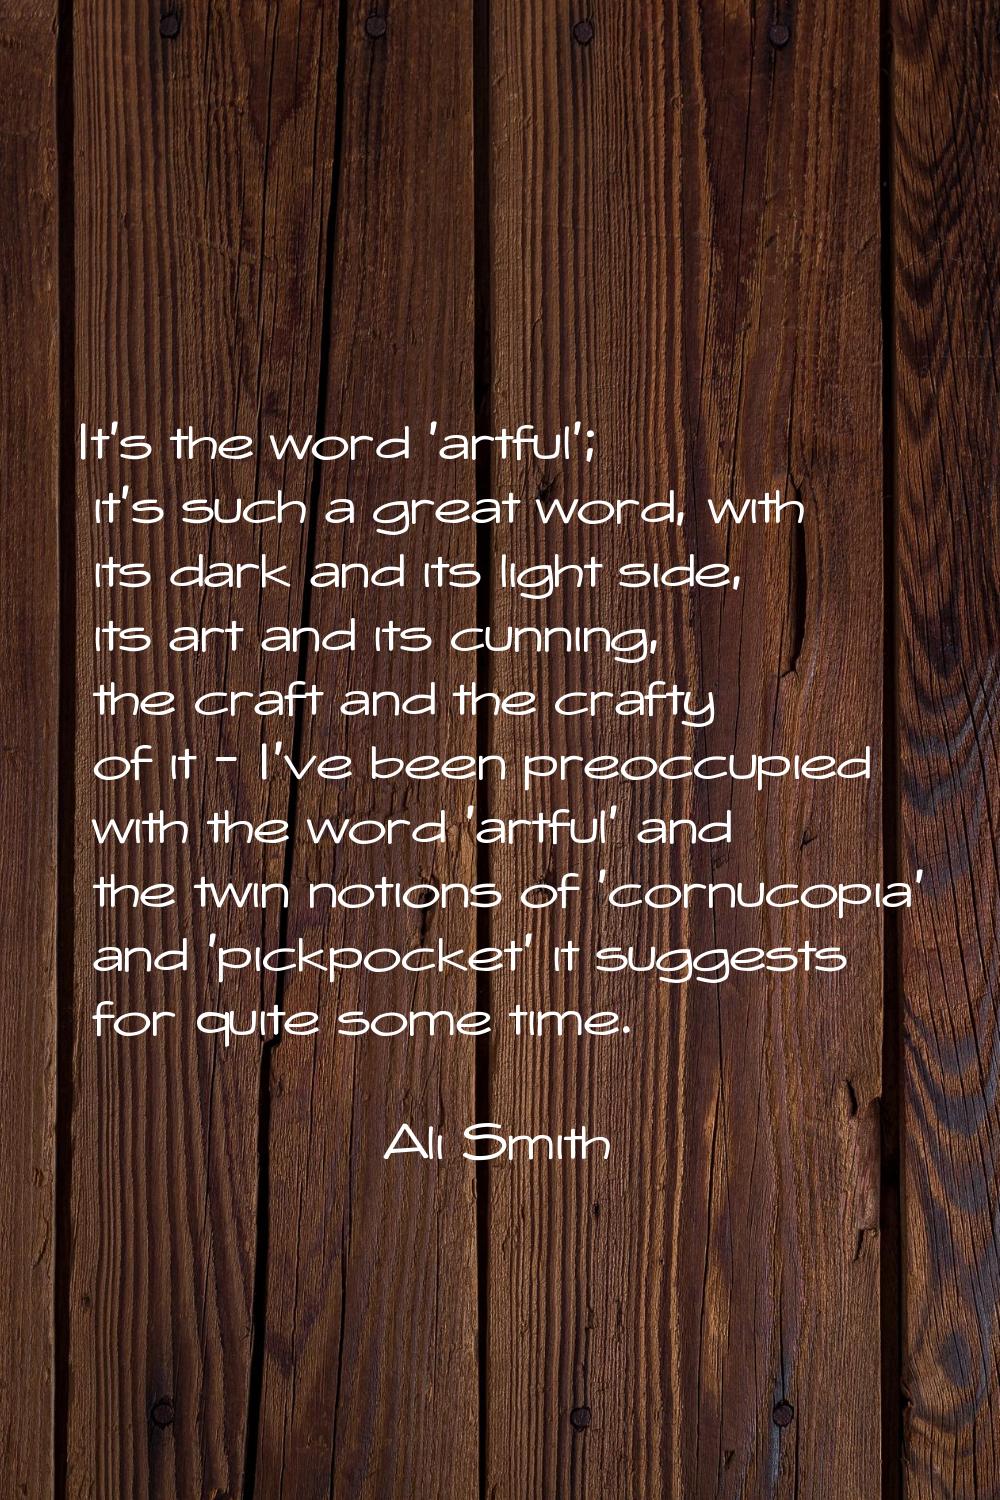 It's the word 'artful'; it's such a great word, with its dark and its light side, its art and its c